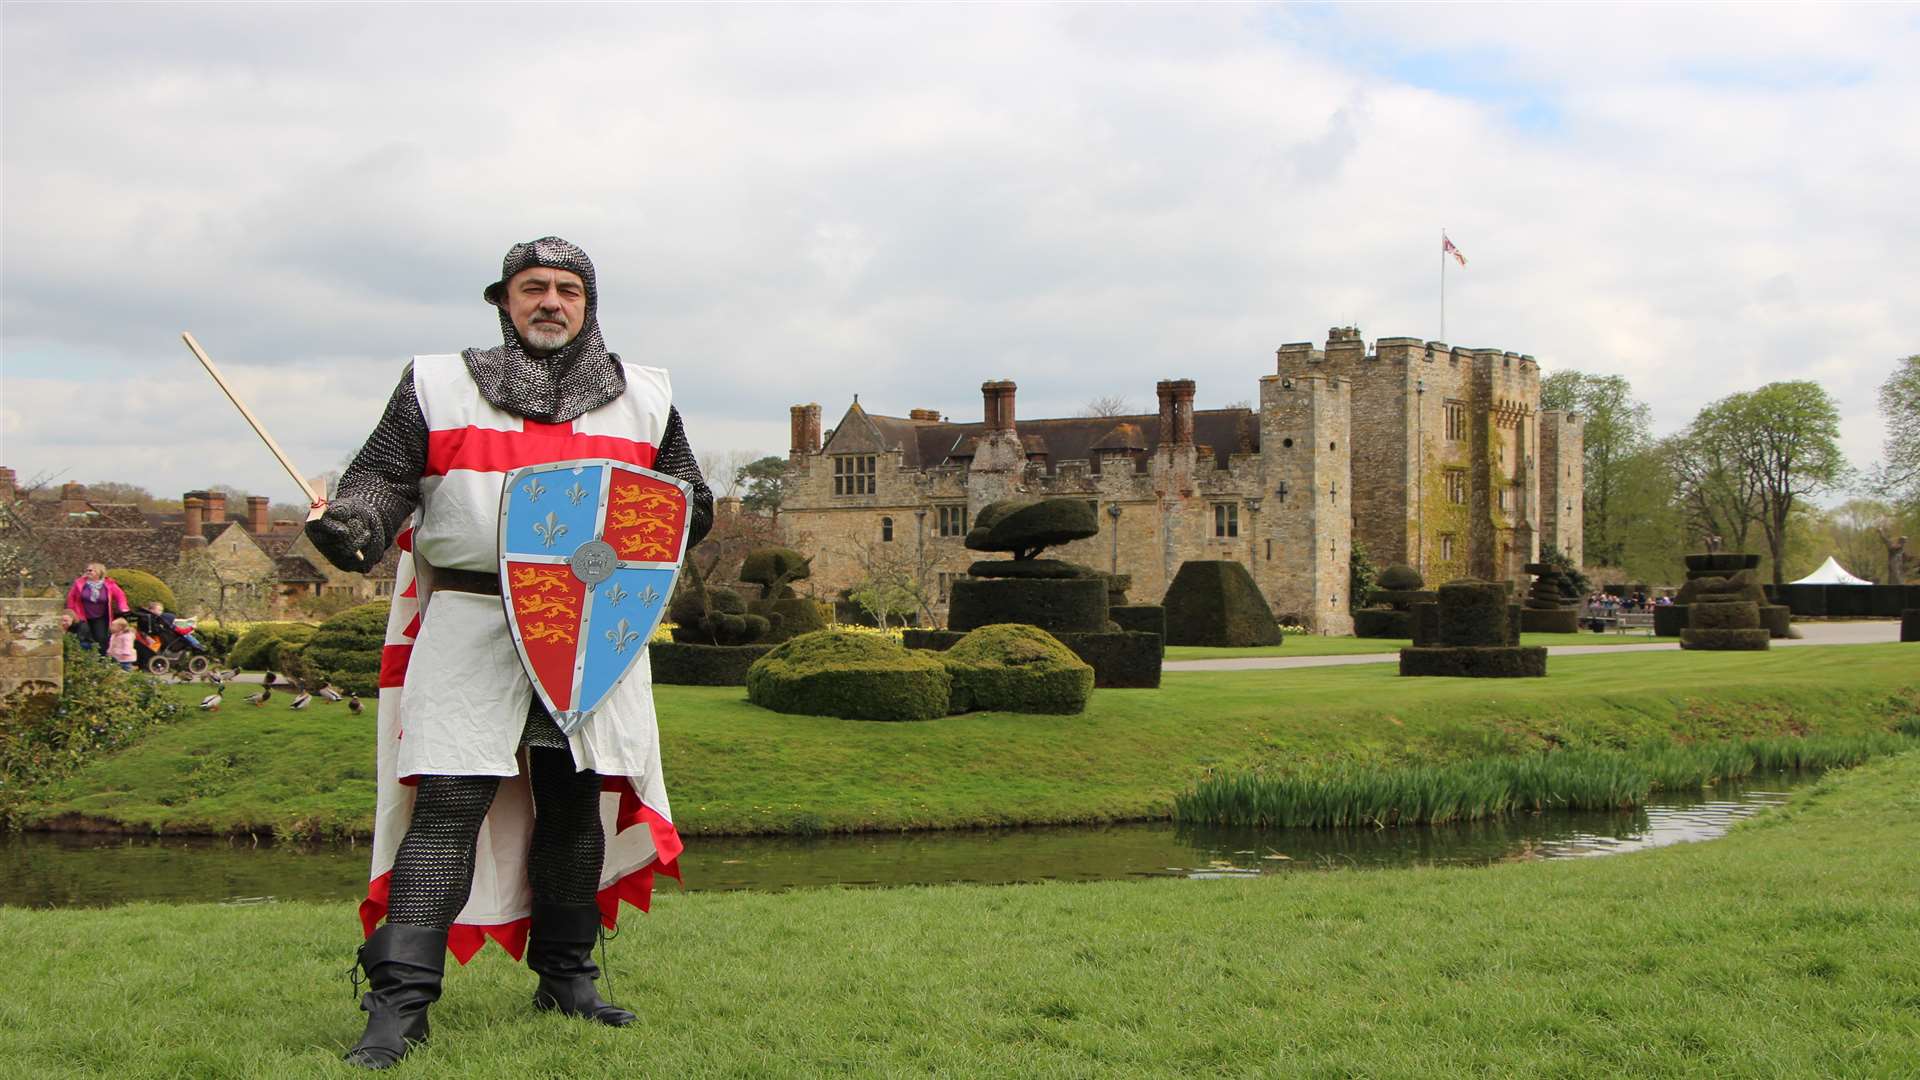 St George at Hever Castle